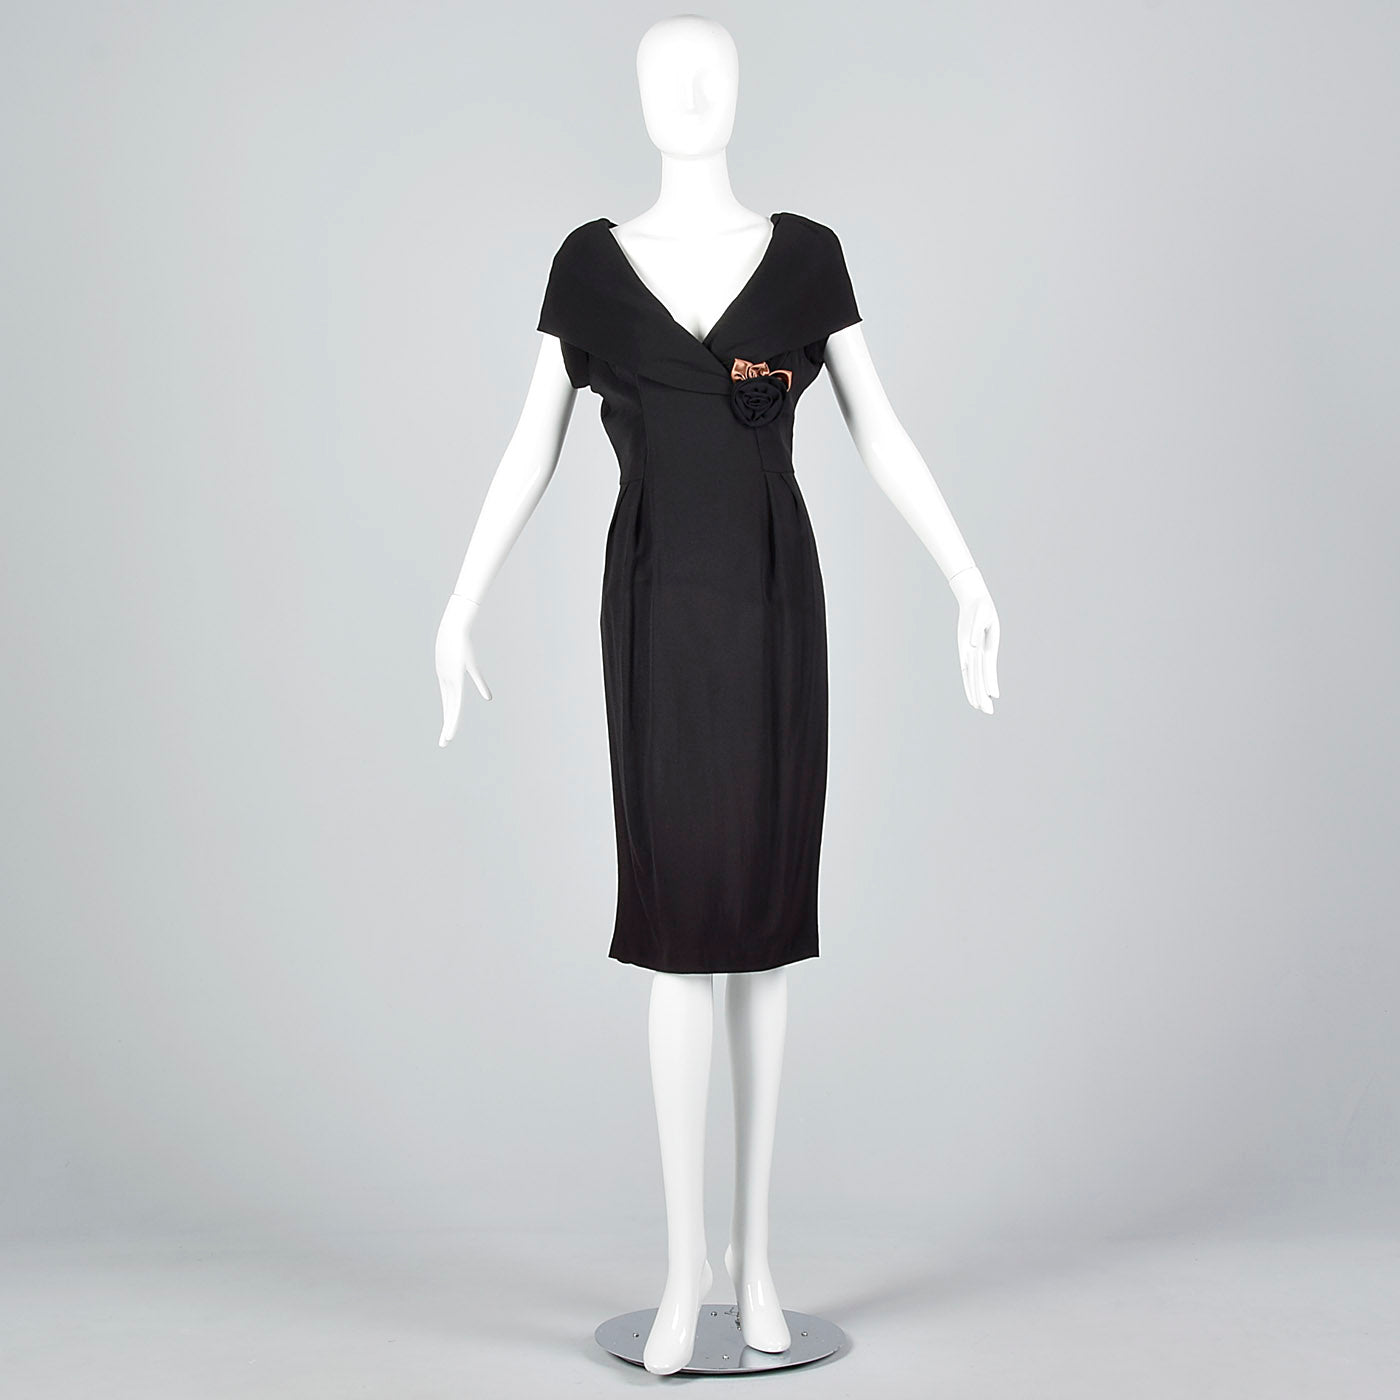 1950s Black Dress with Shawl Collar and Low Cut Front